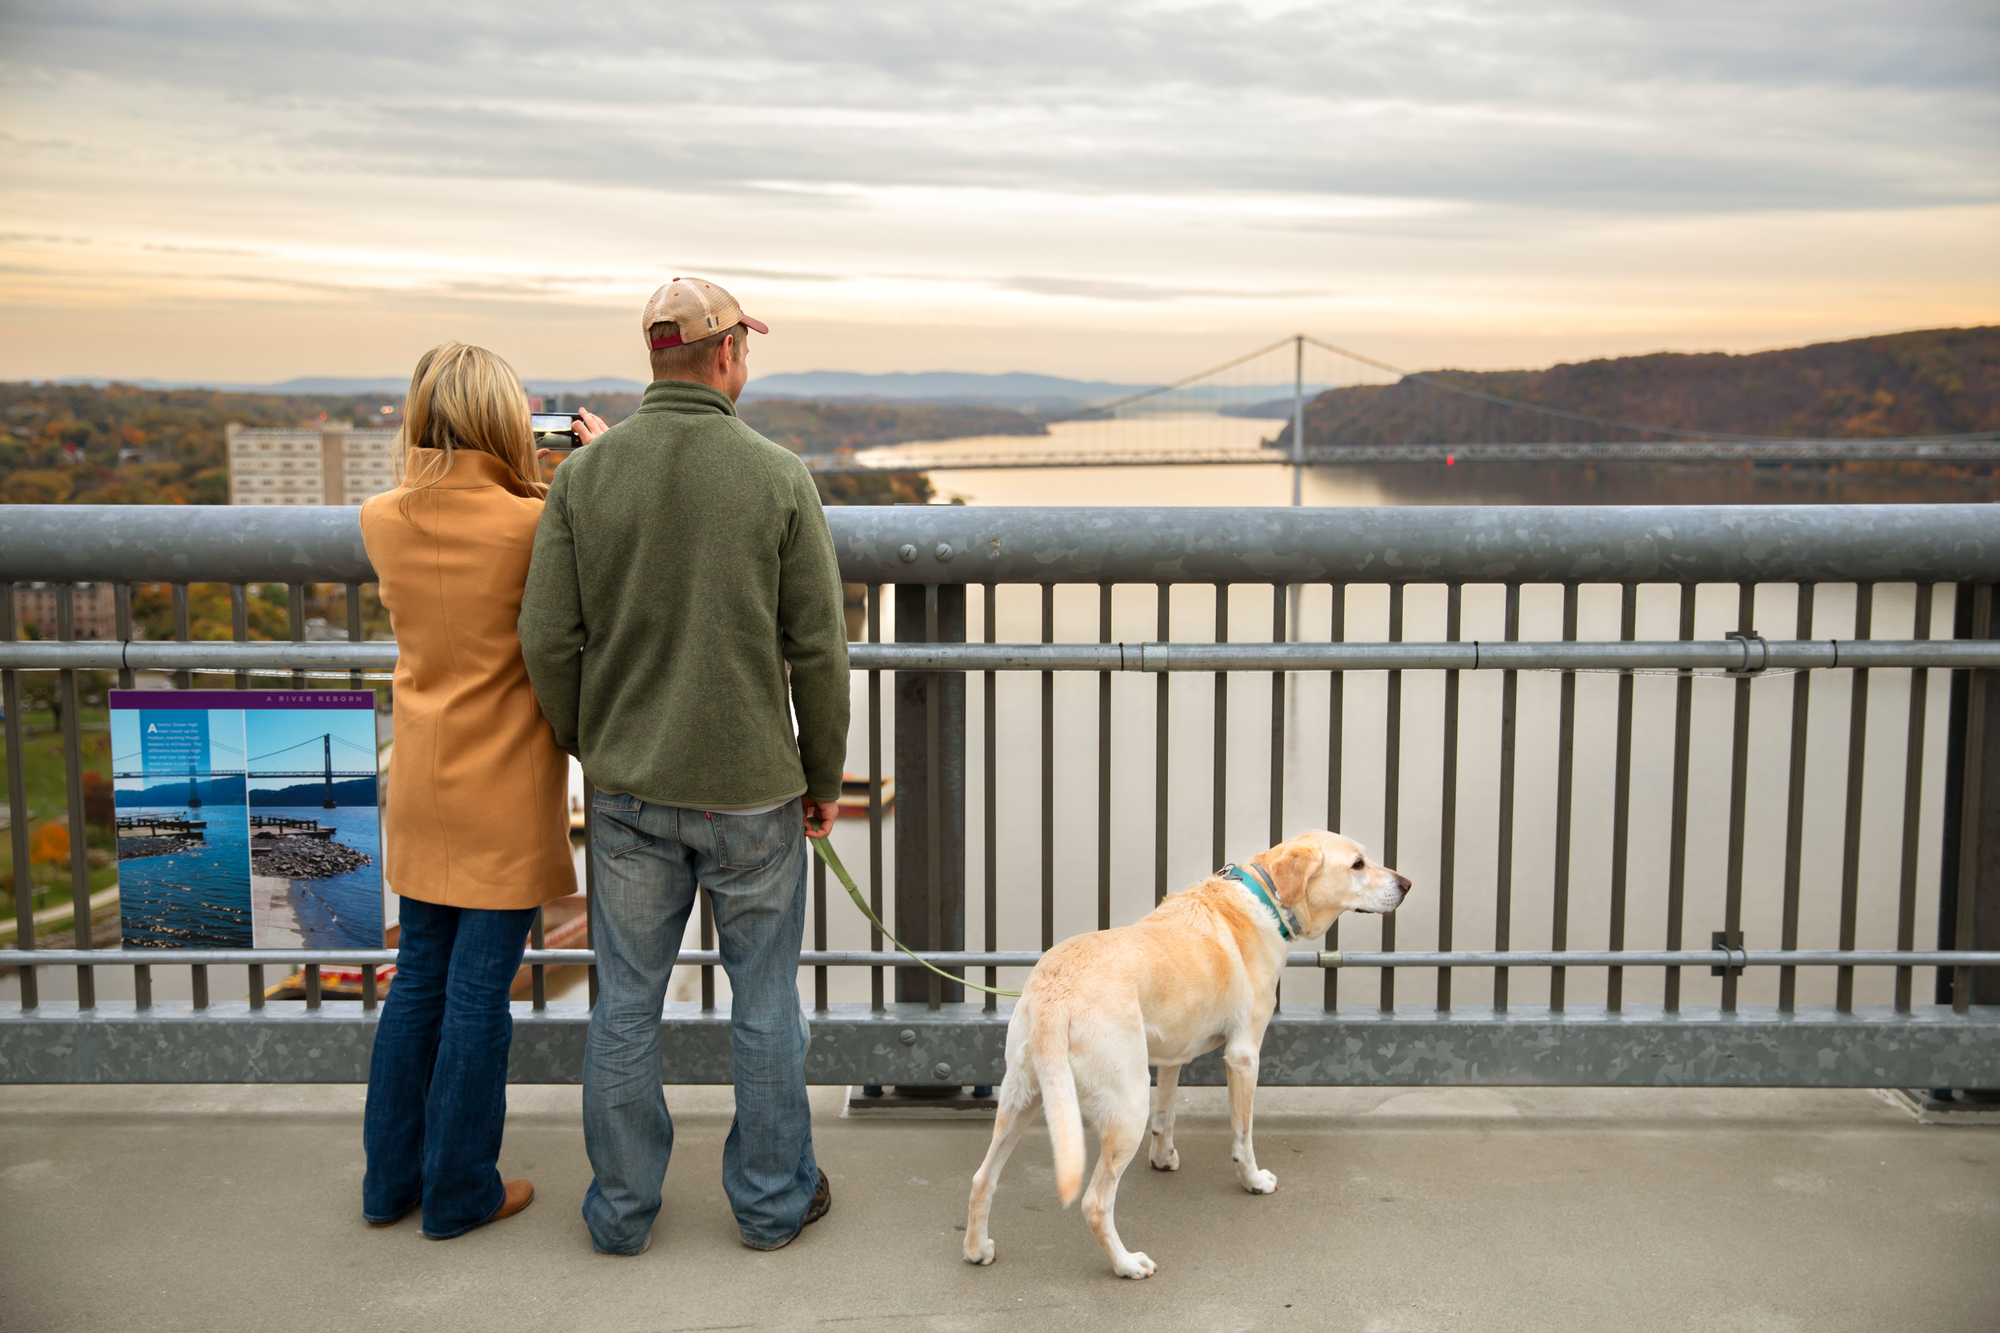 The Walkway over Hudson State Park in Dutchess County is an accessible path for wheelchair users